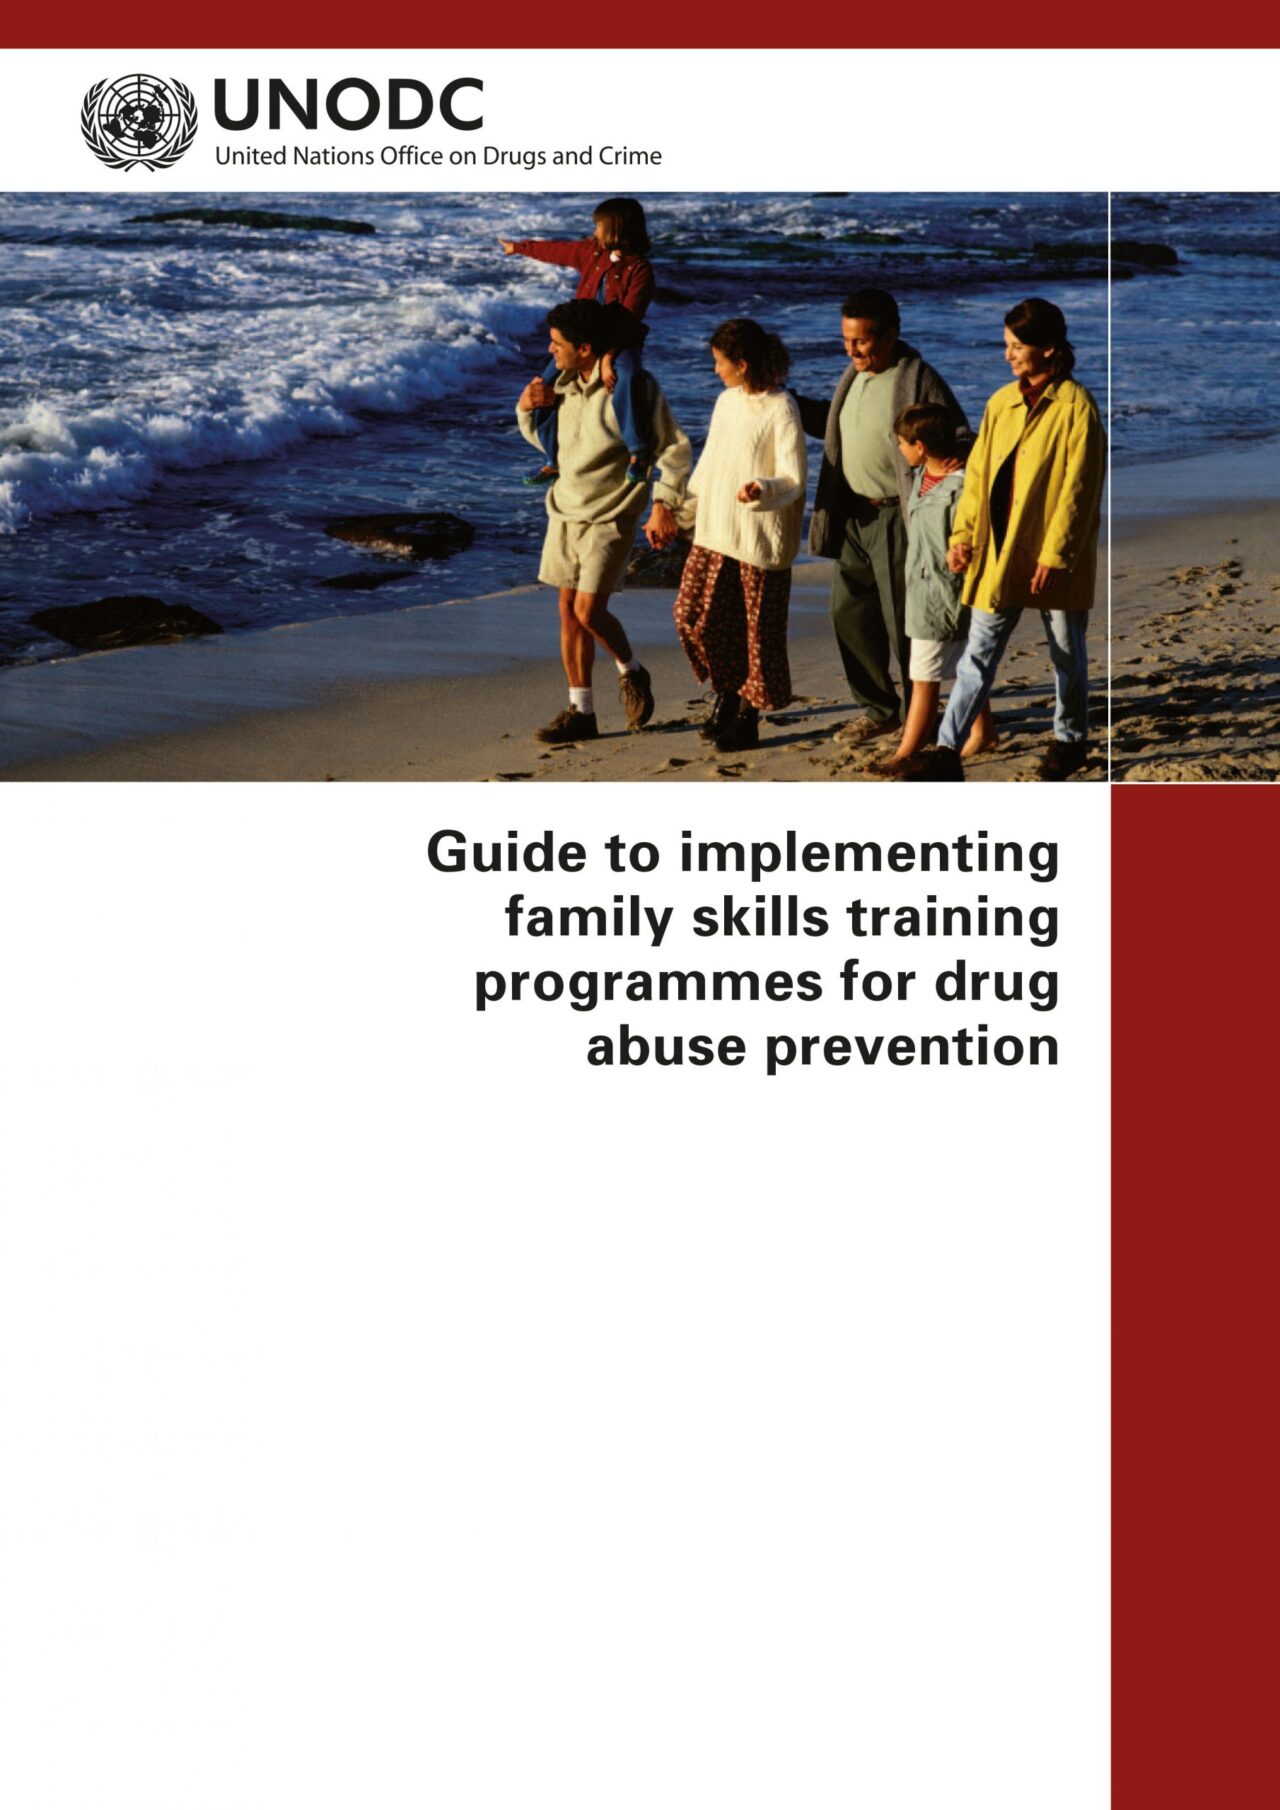 Guide to implementing family skills training programmes for drug